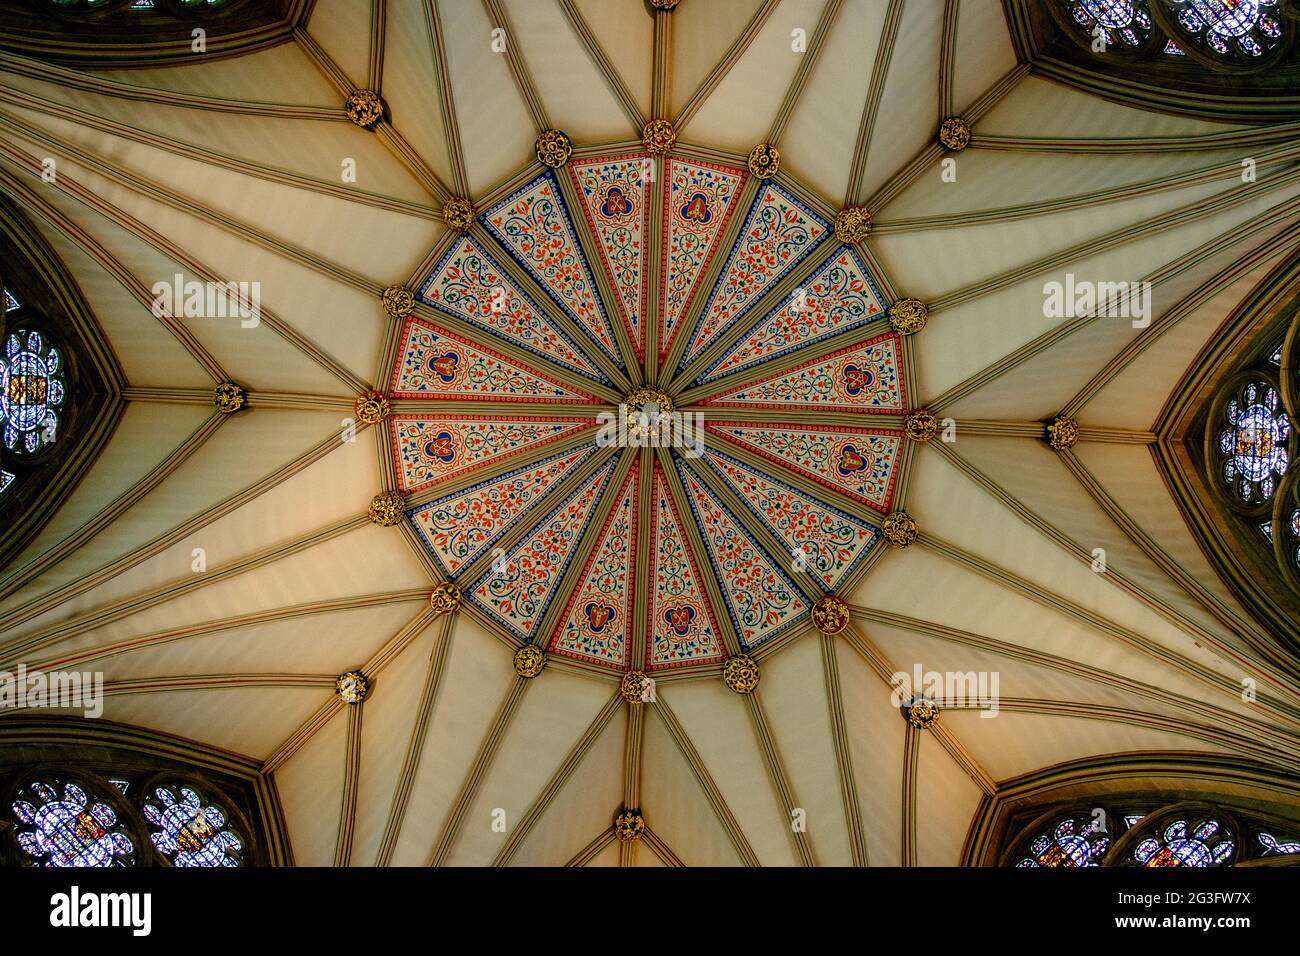 Intricate detail of the vaulted ceiling of the Chapter House, part of York Minster Cathedral, York, England Stock Photo